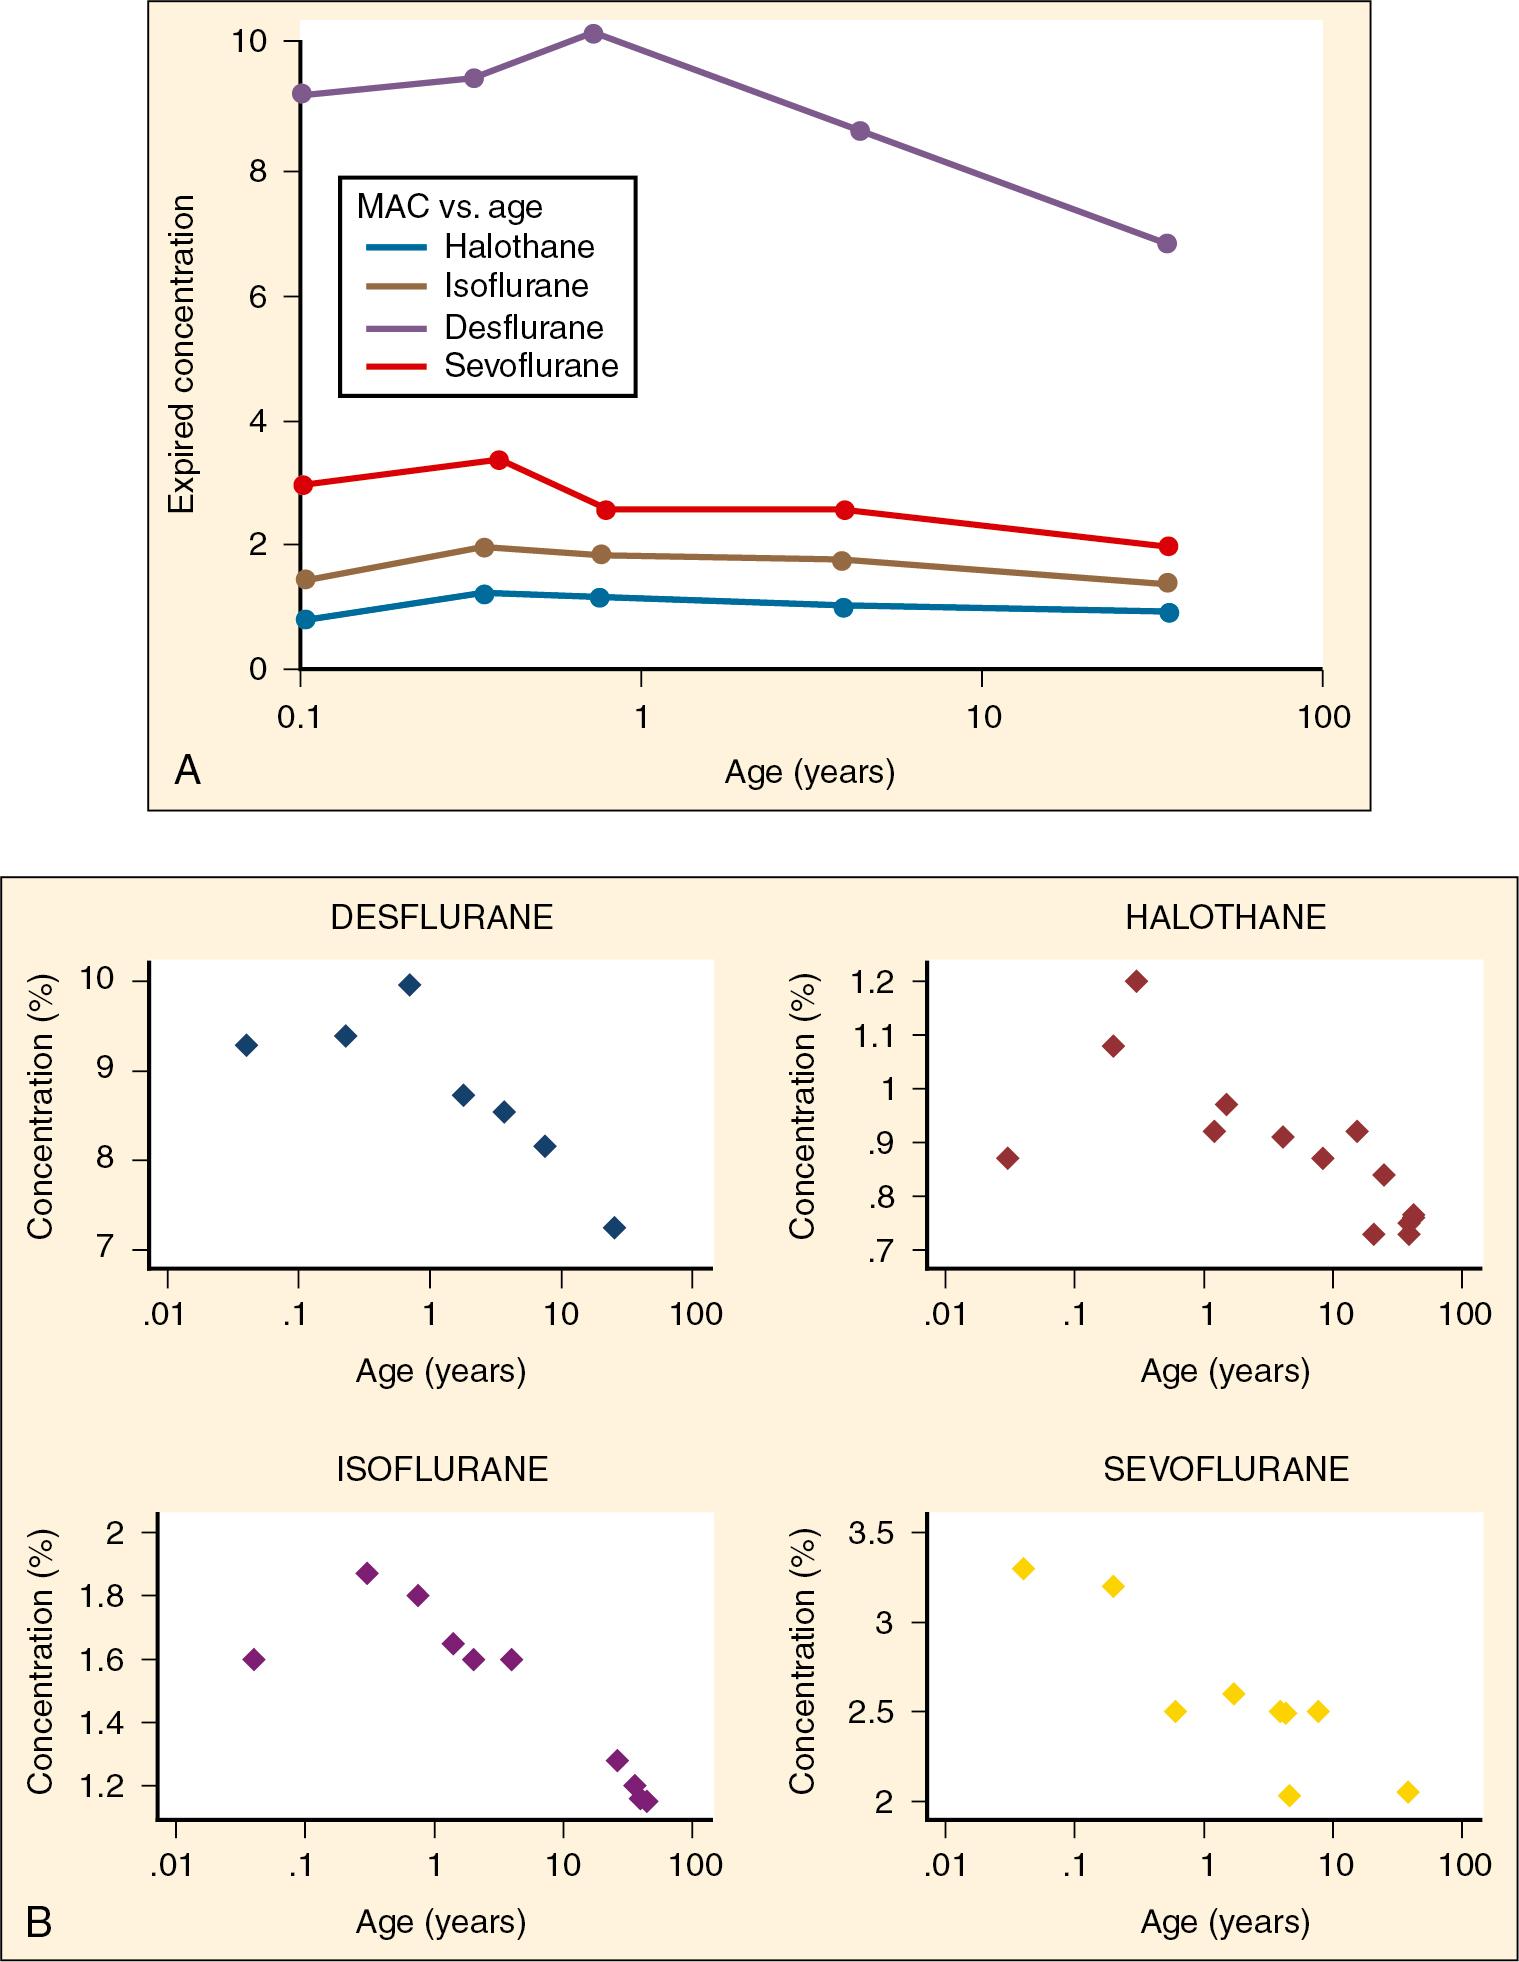 Fig. 10.2, The MACs of Four Commonly Used Inhaled Anesthetics Are Plotted Versus Age.